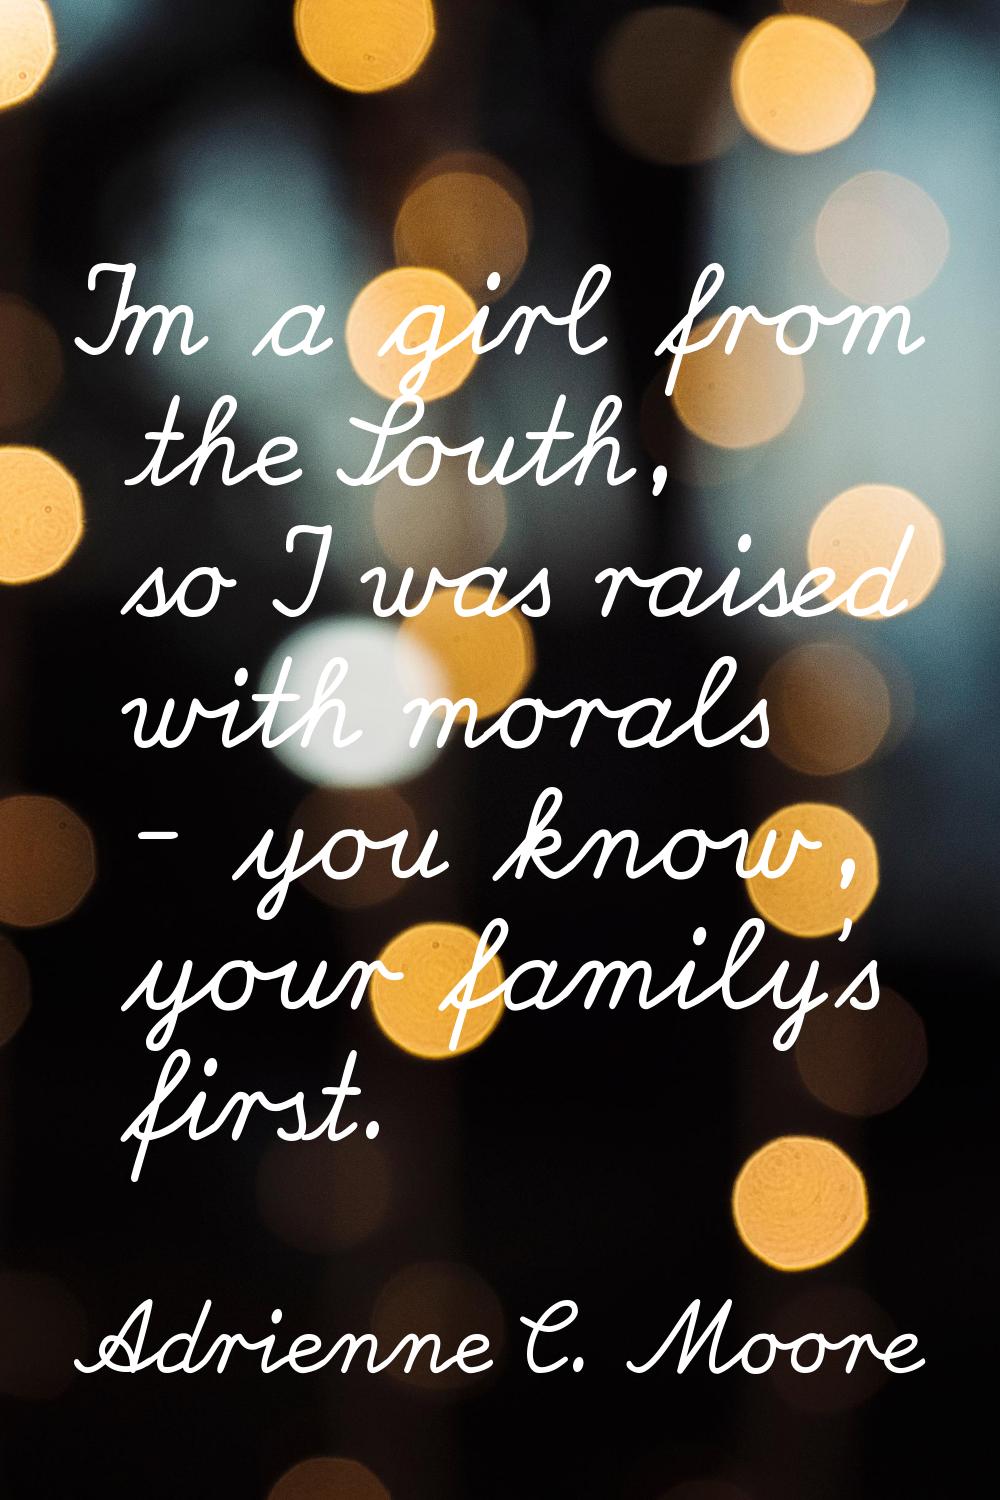 I'm a girl from the South, so I was raised with morals - you know, your family's first.